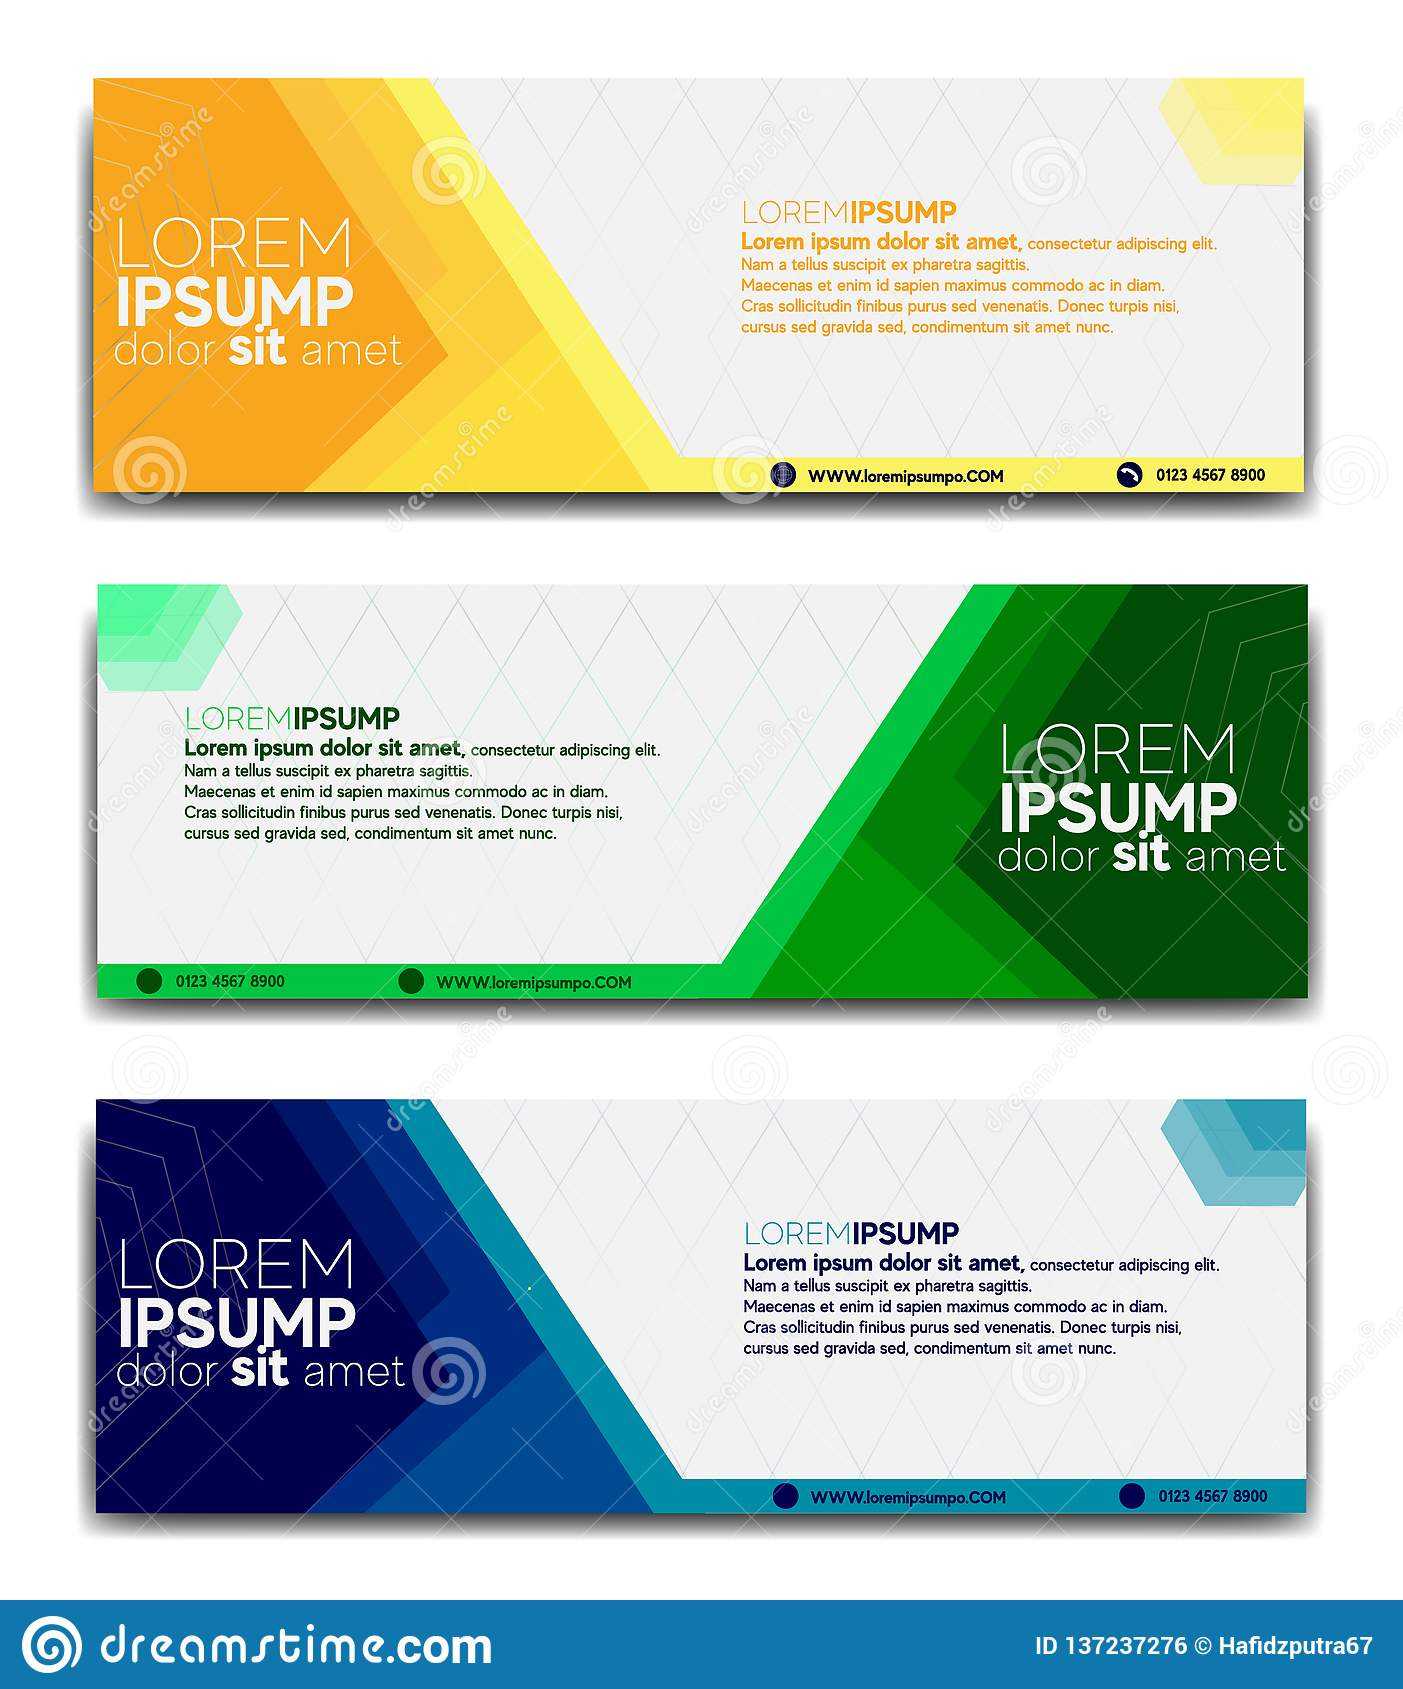 Promotional Banner Design Template 2019 Stock Vector Intended For Website Banner Design Templates